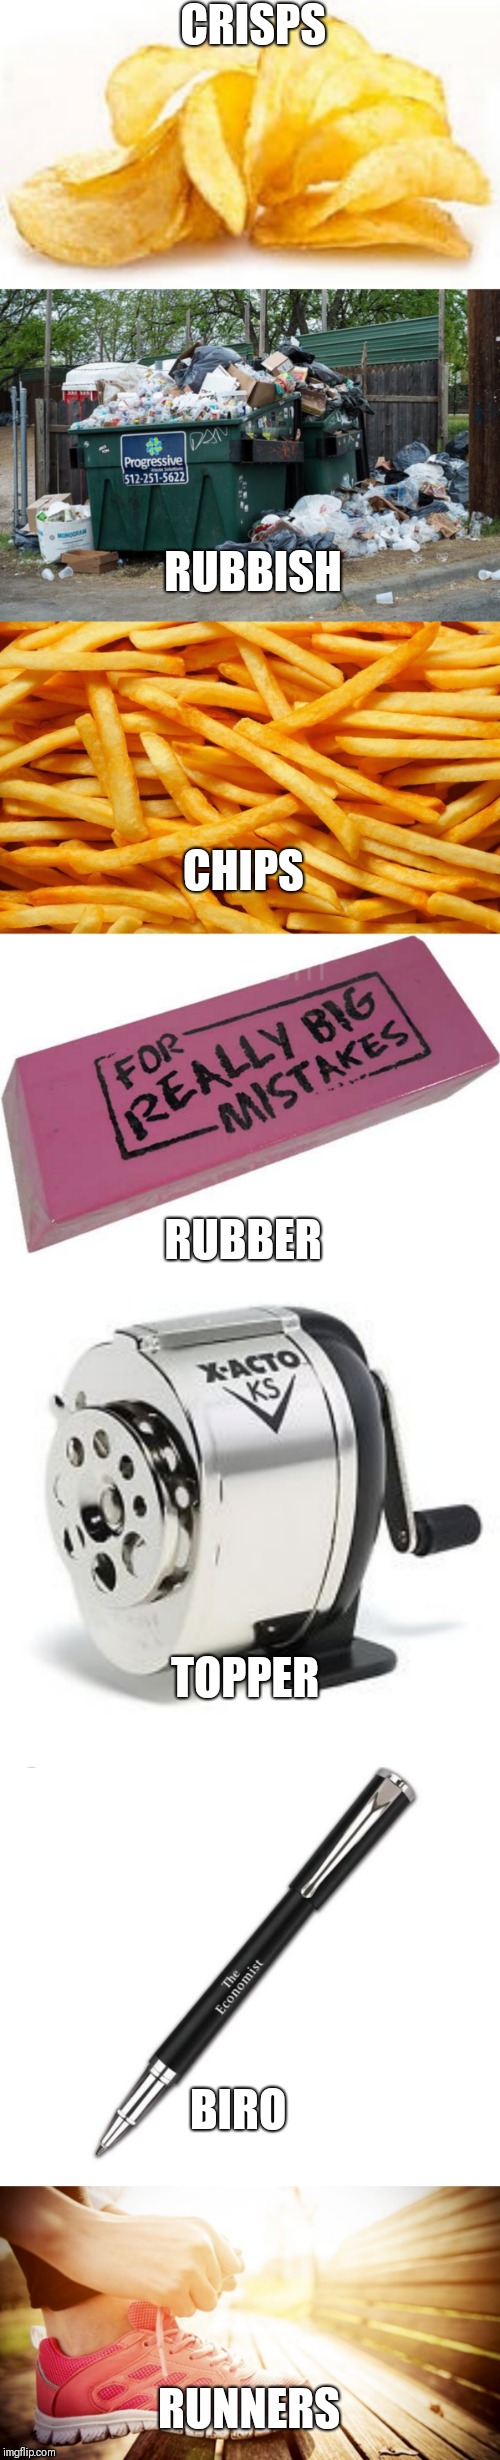 CRISPS RUNNERS CHIPS RUBBISH BIRO RUBBER TOPPER | image tagged in french fries,pencil sharpener,garbage,potato chips,big eraser,sneakers | made w/ Imgflip meme maker